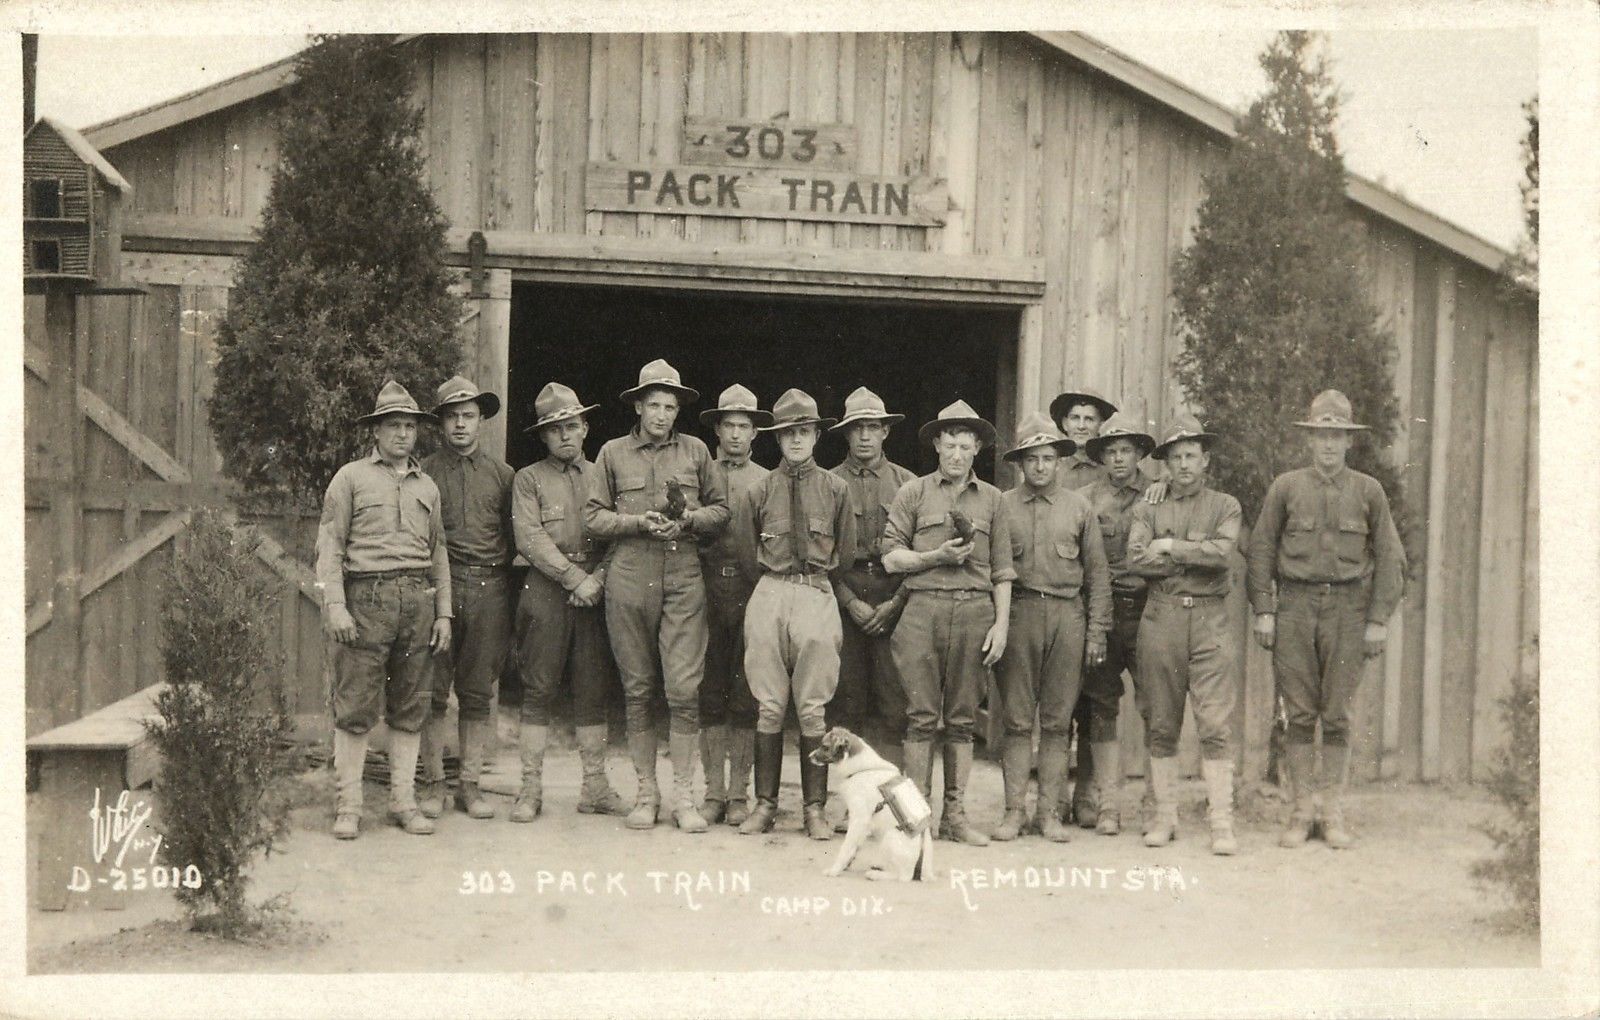 Camp Dix - Pack Train Remount Station, Troops & Mascot, - 1917-18